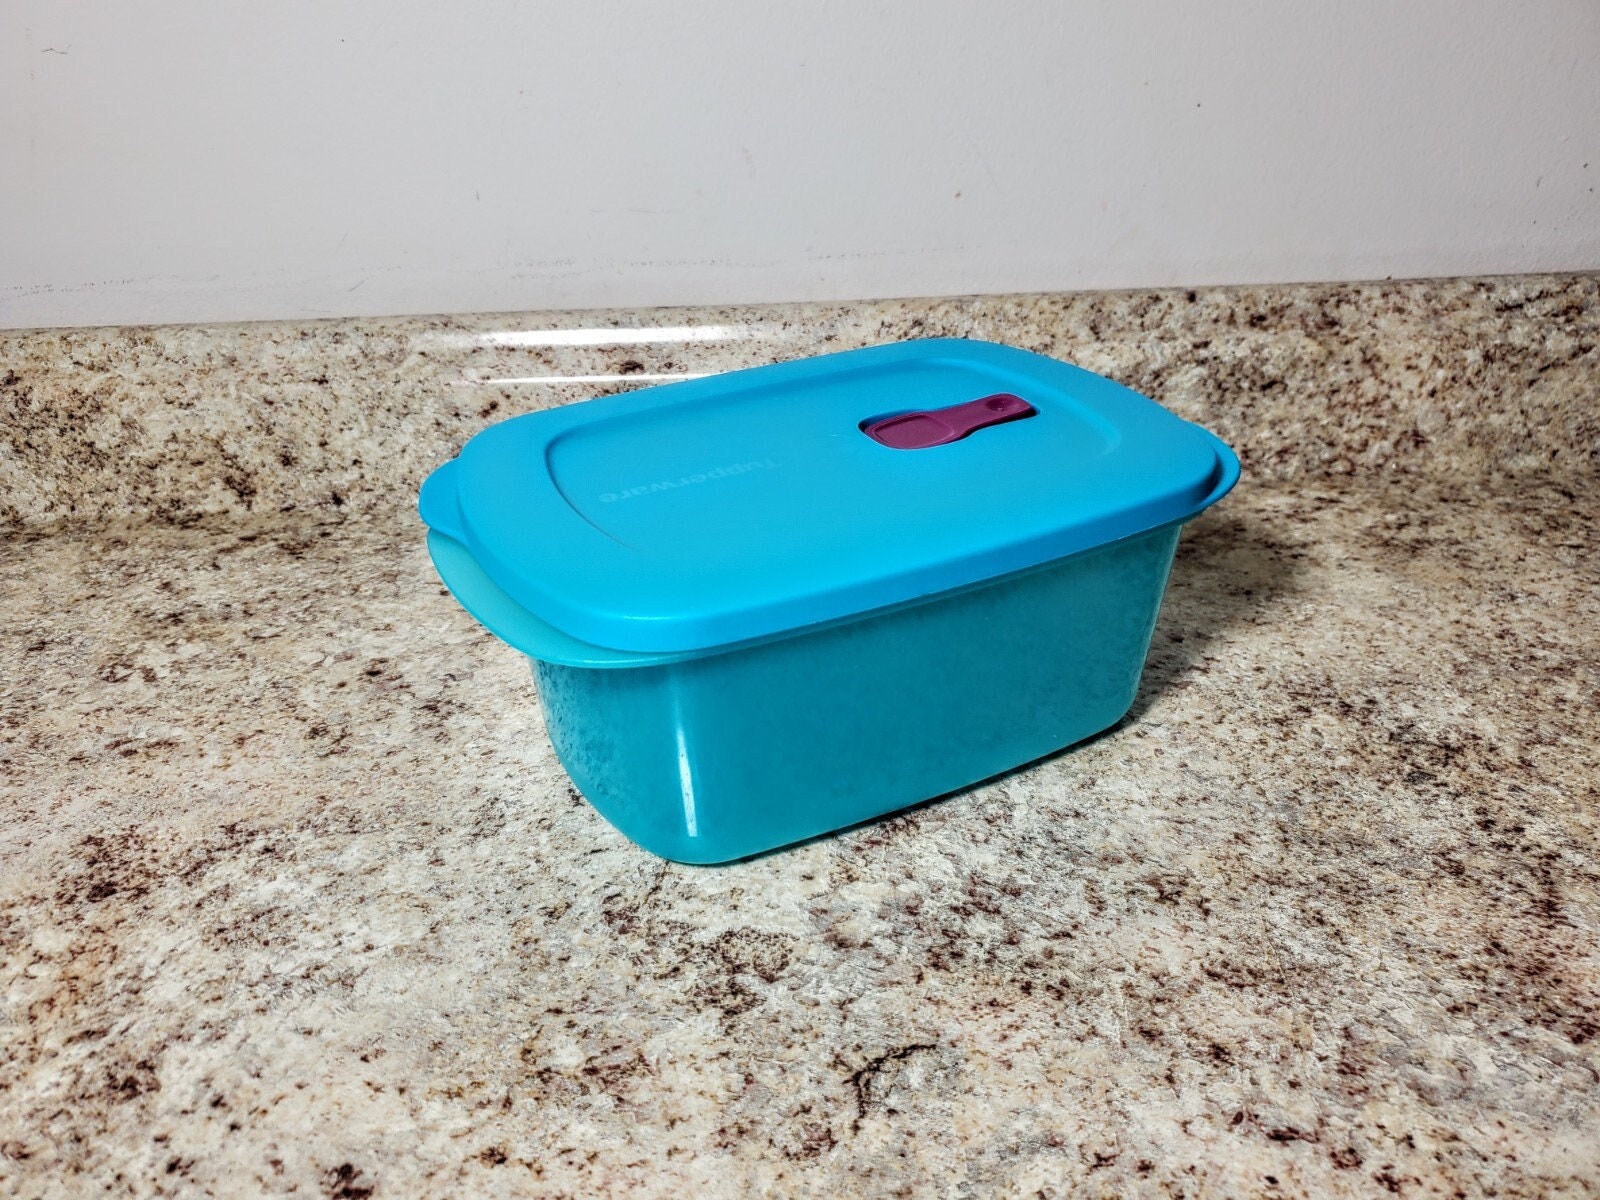 Tupperware Plastic Dry Storage Containers - 1.7 L, 4 Pieces, Multicolored